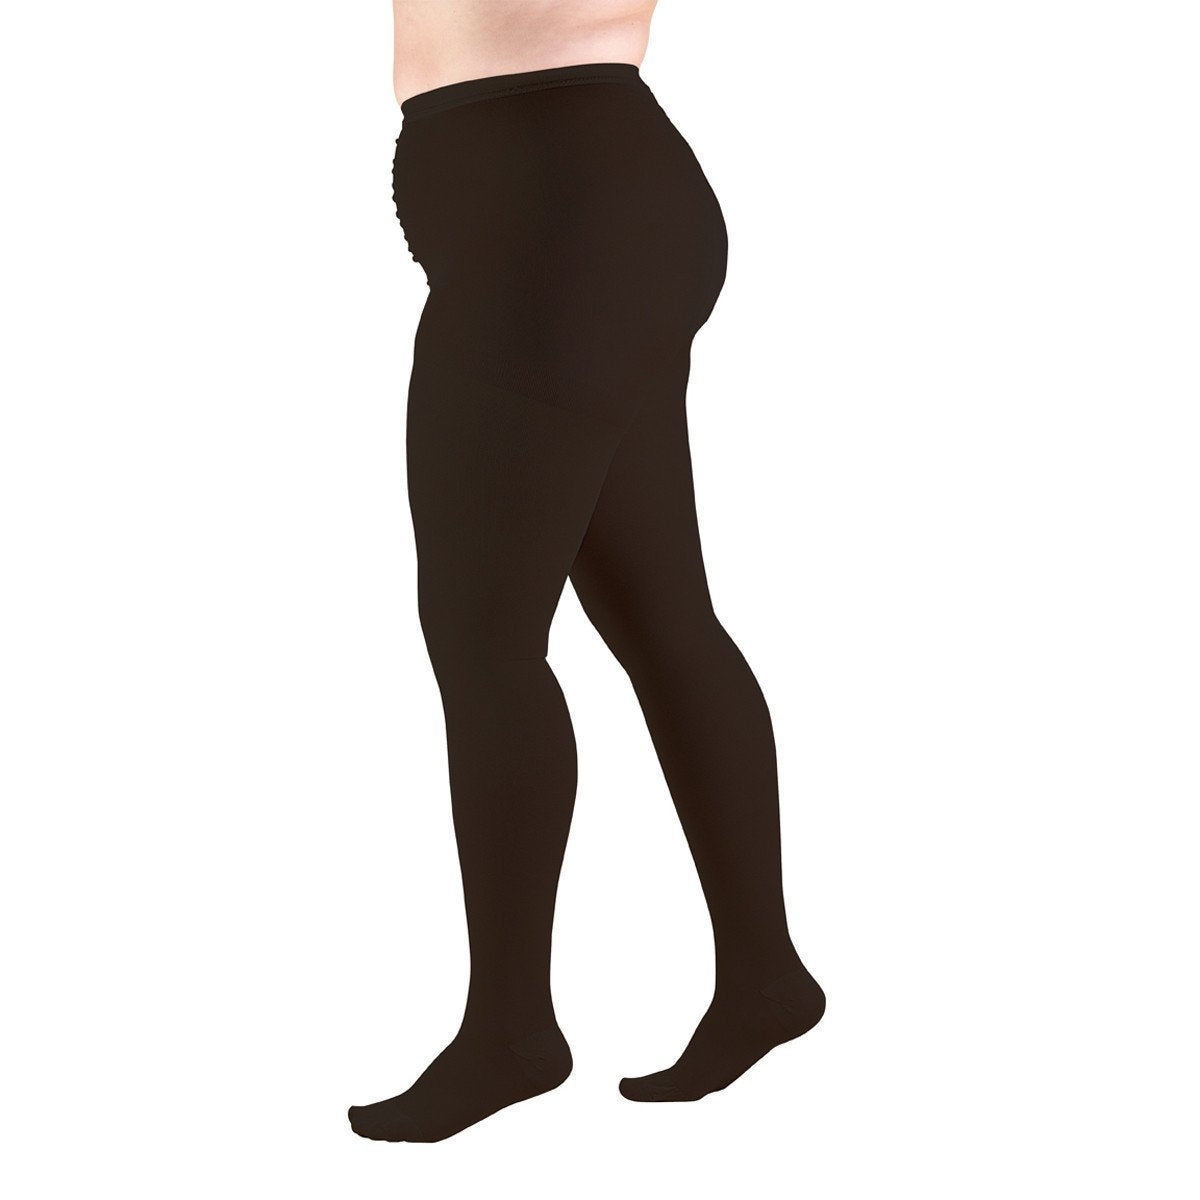 Plus Size Compression Tights For Women Circulation 20-30mmHg - Graduated  Support Stockings